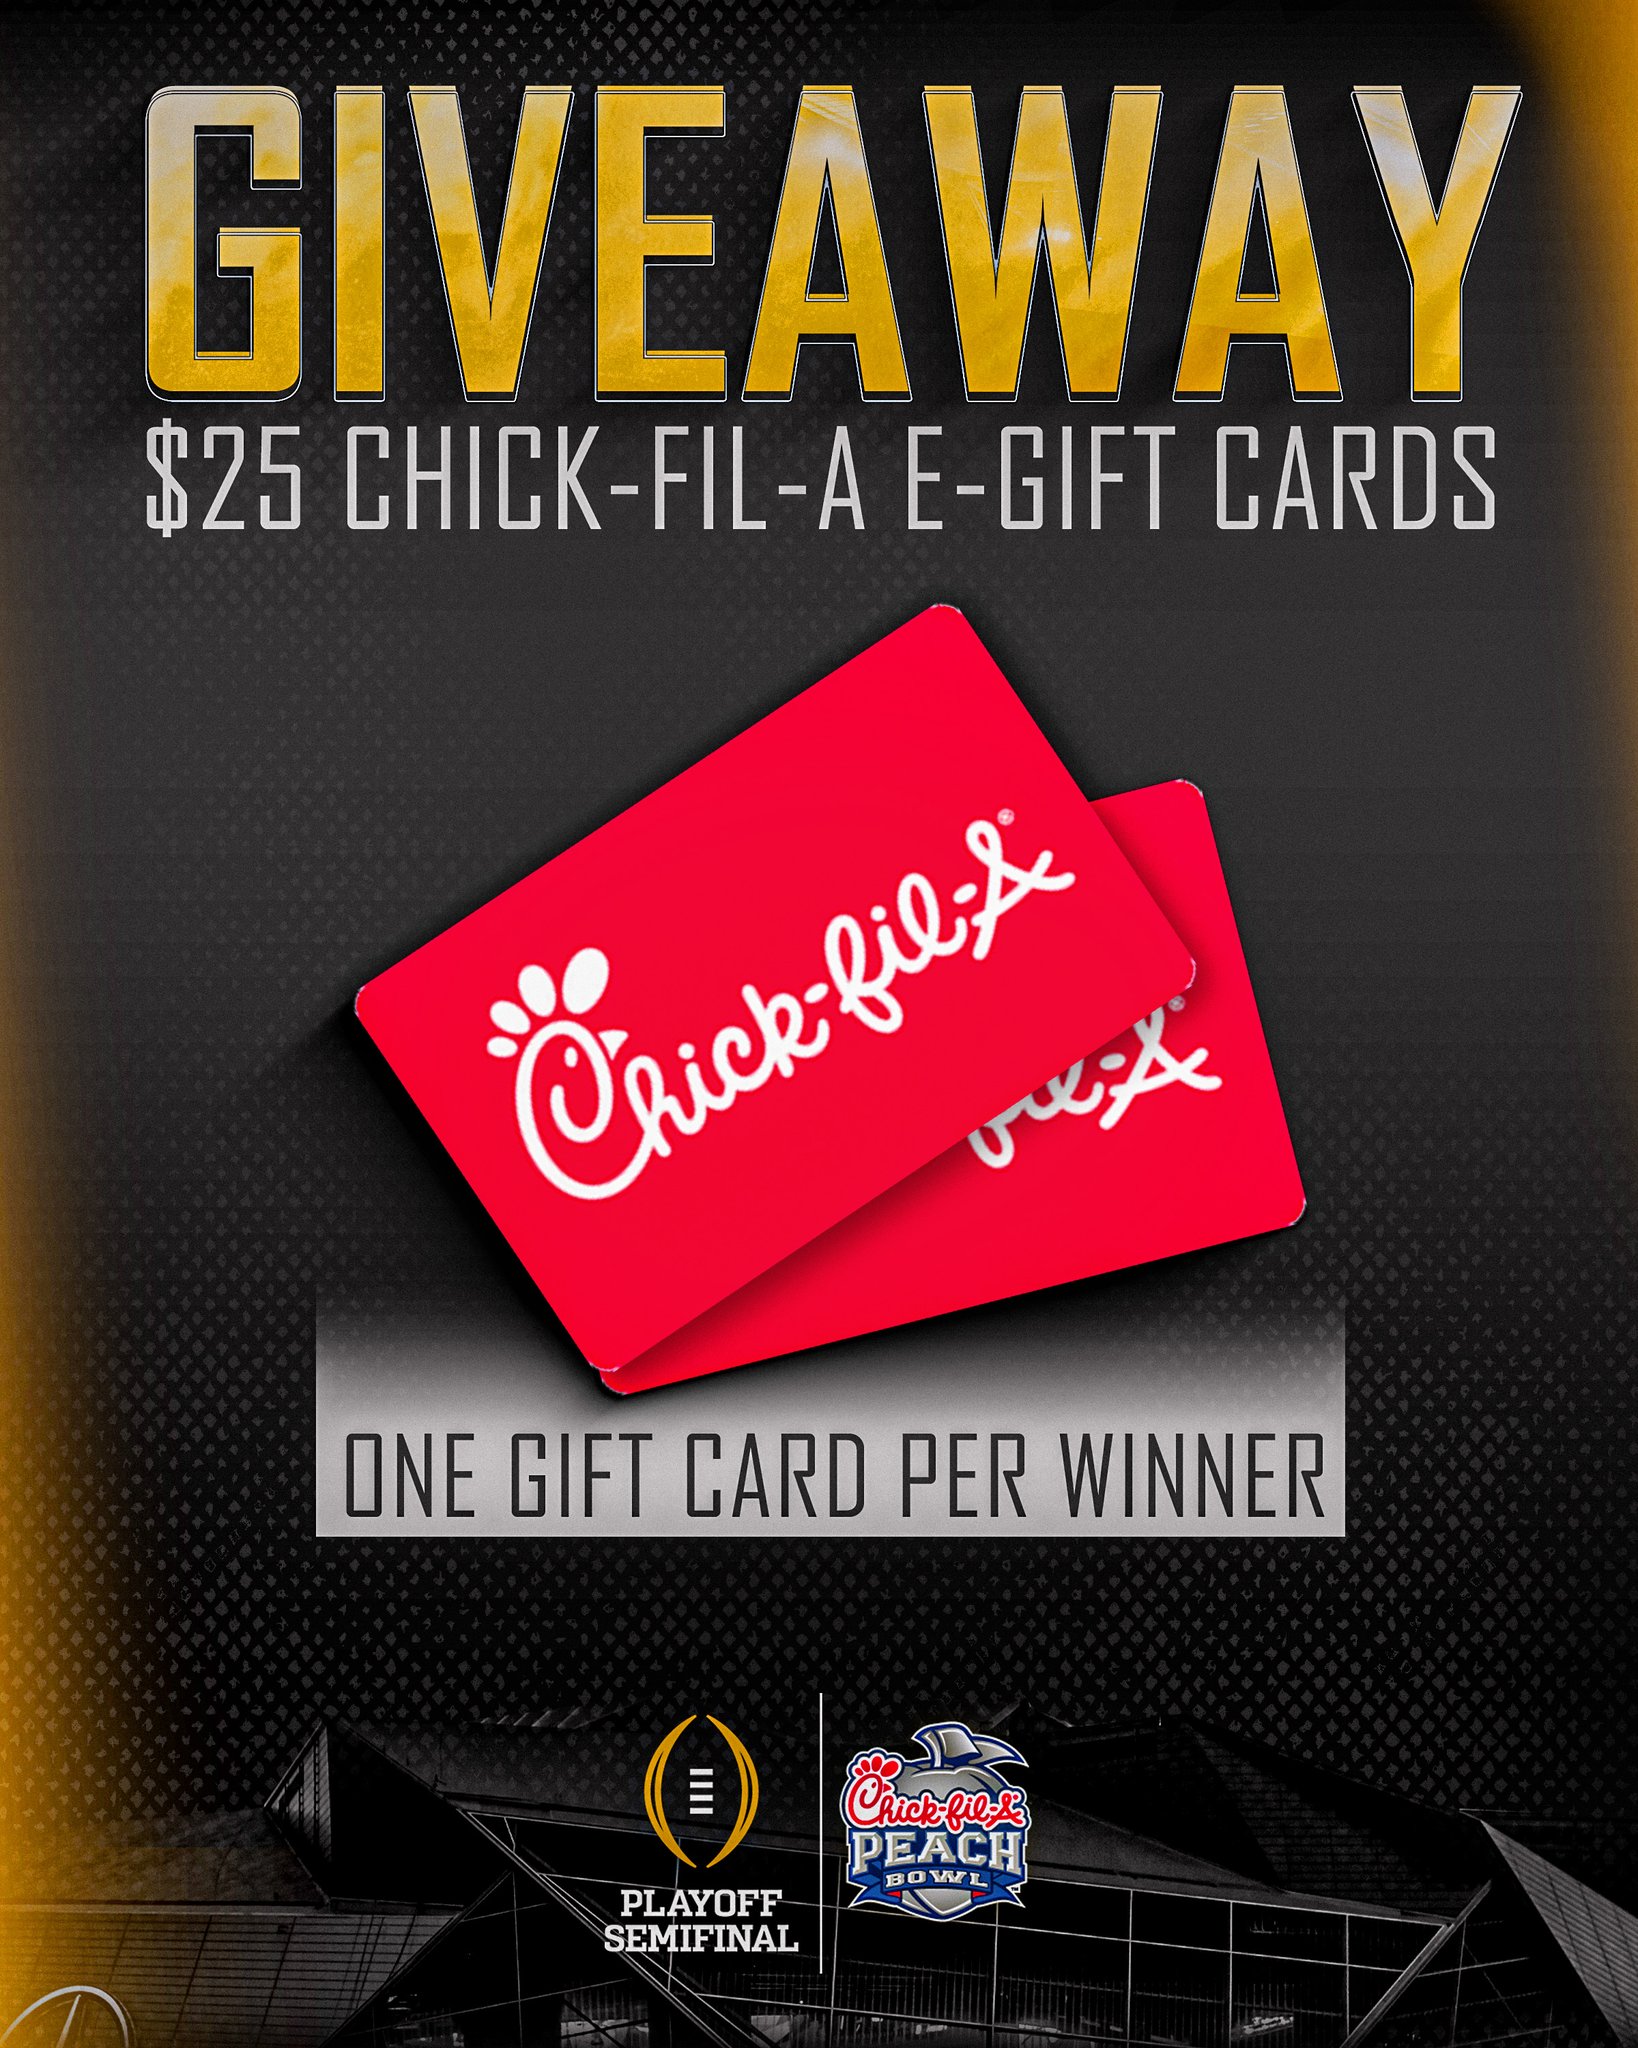 Chick-Fil-A, Chick-Fil-A Gift Card. 7/2014 Pic by Mike Moza…